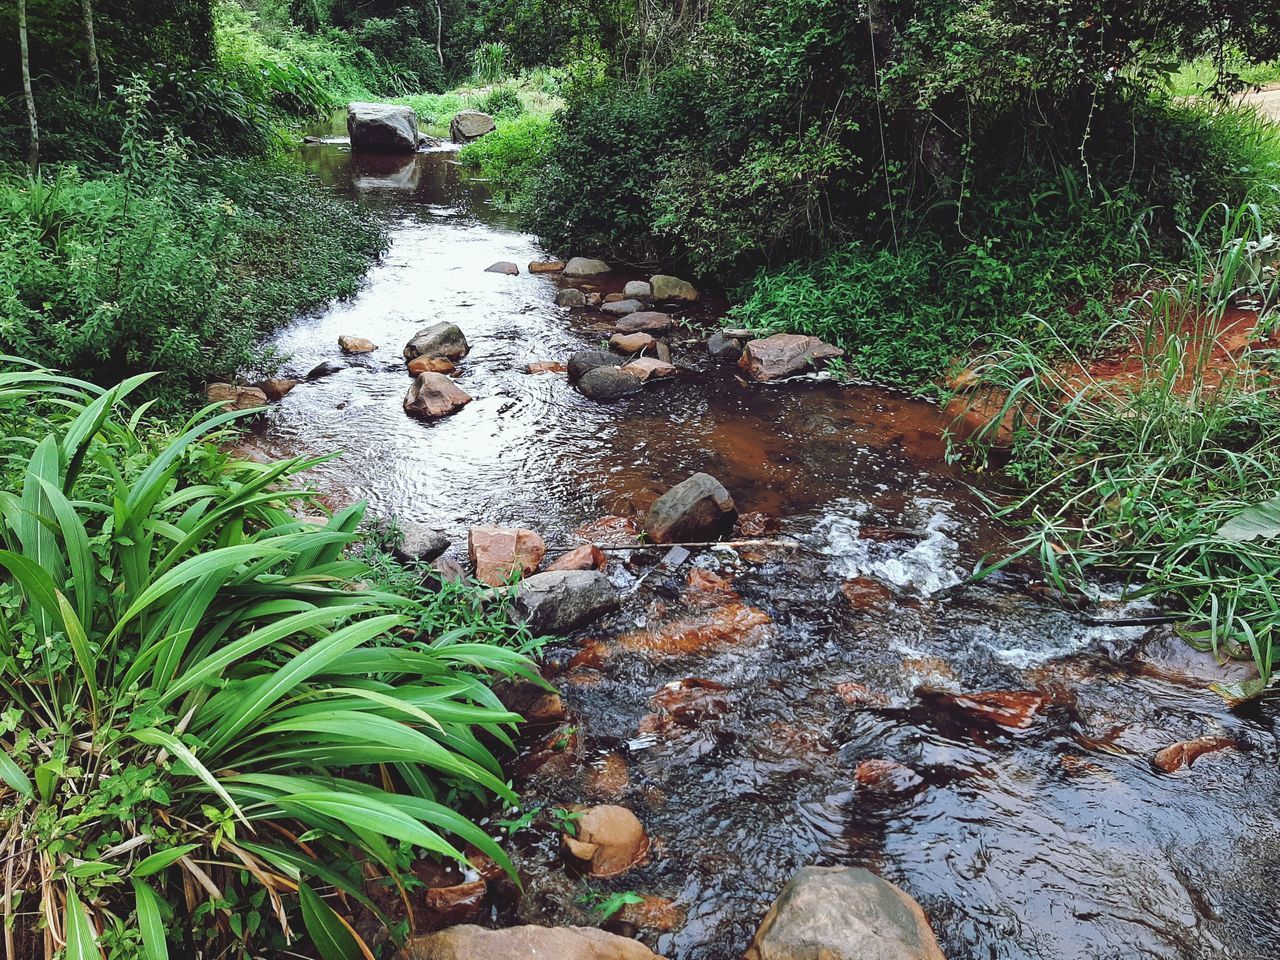 plant, stream, nature, growth, tree, day, land, water, pond, rock, beauty in nature, green, no people, forest, tranquility, high angle view, woodland, downloading, body of water, watercourse, wilderness, outdoors, water feature, flowing water, stream bed, tranquil scene, jungle, creek, grass, scenics - nature, stone, rainforest, non-urban scene, natural environment